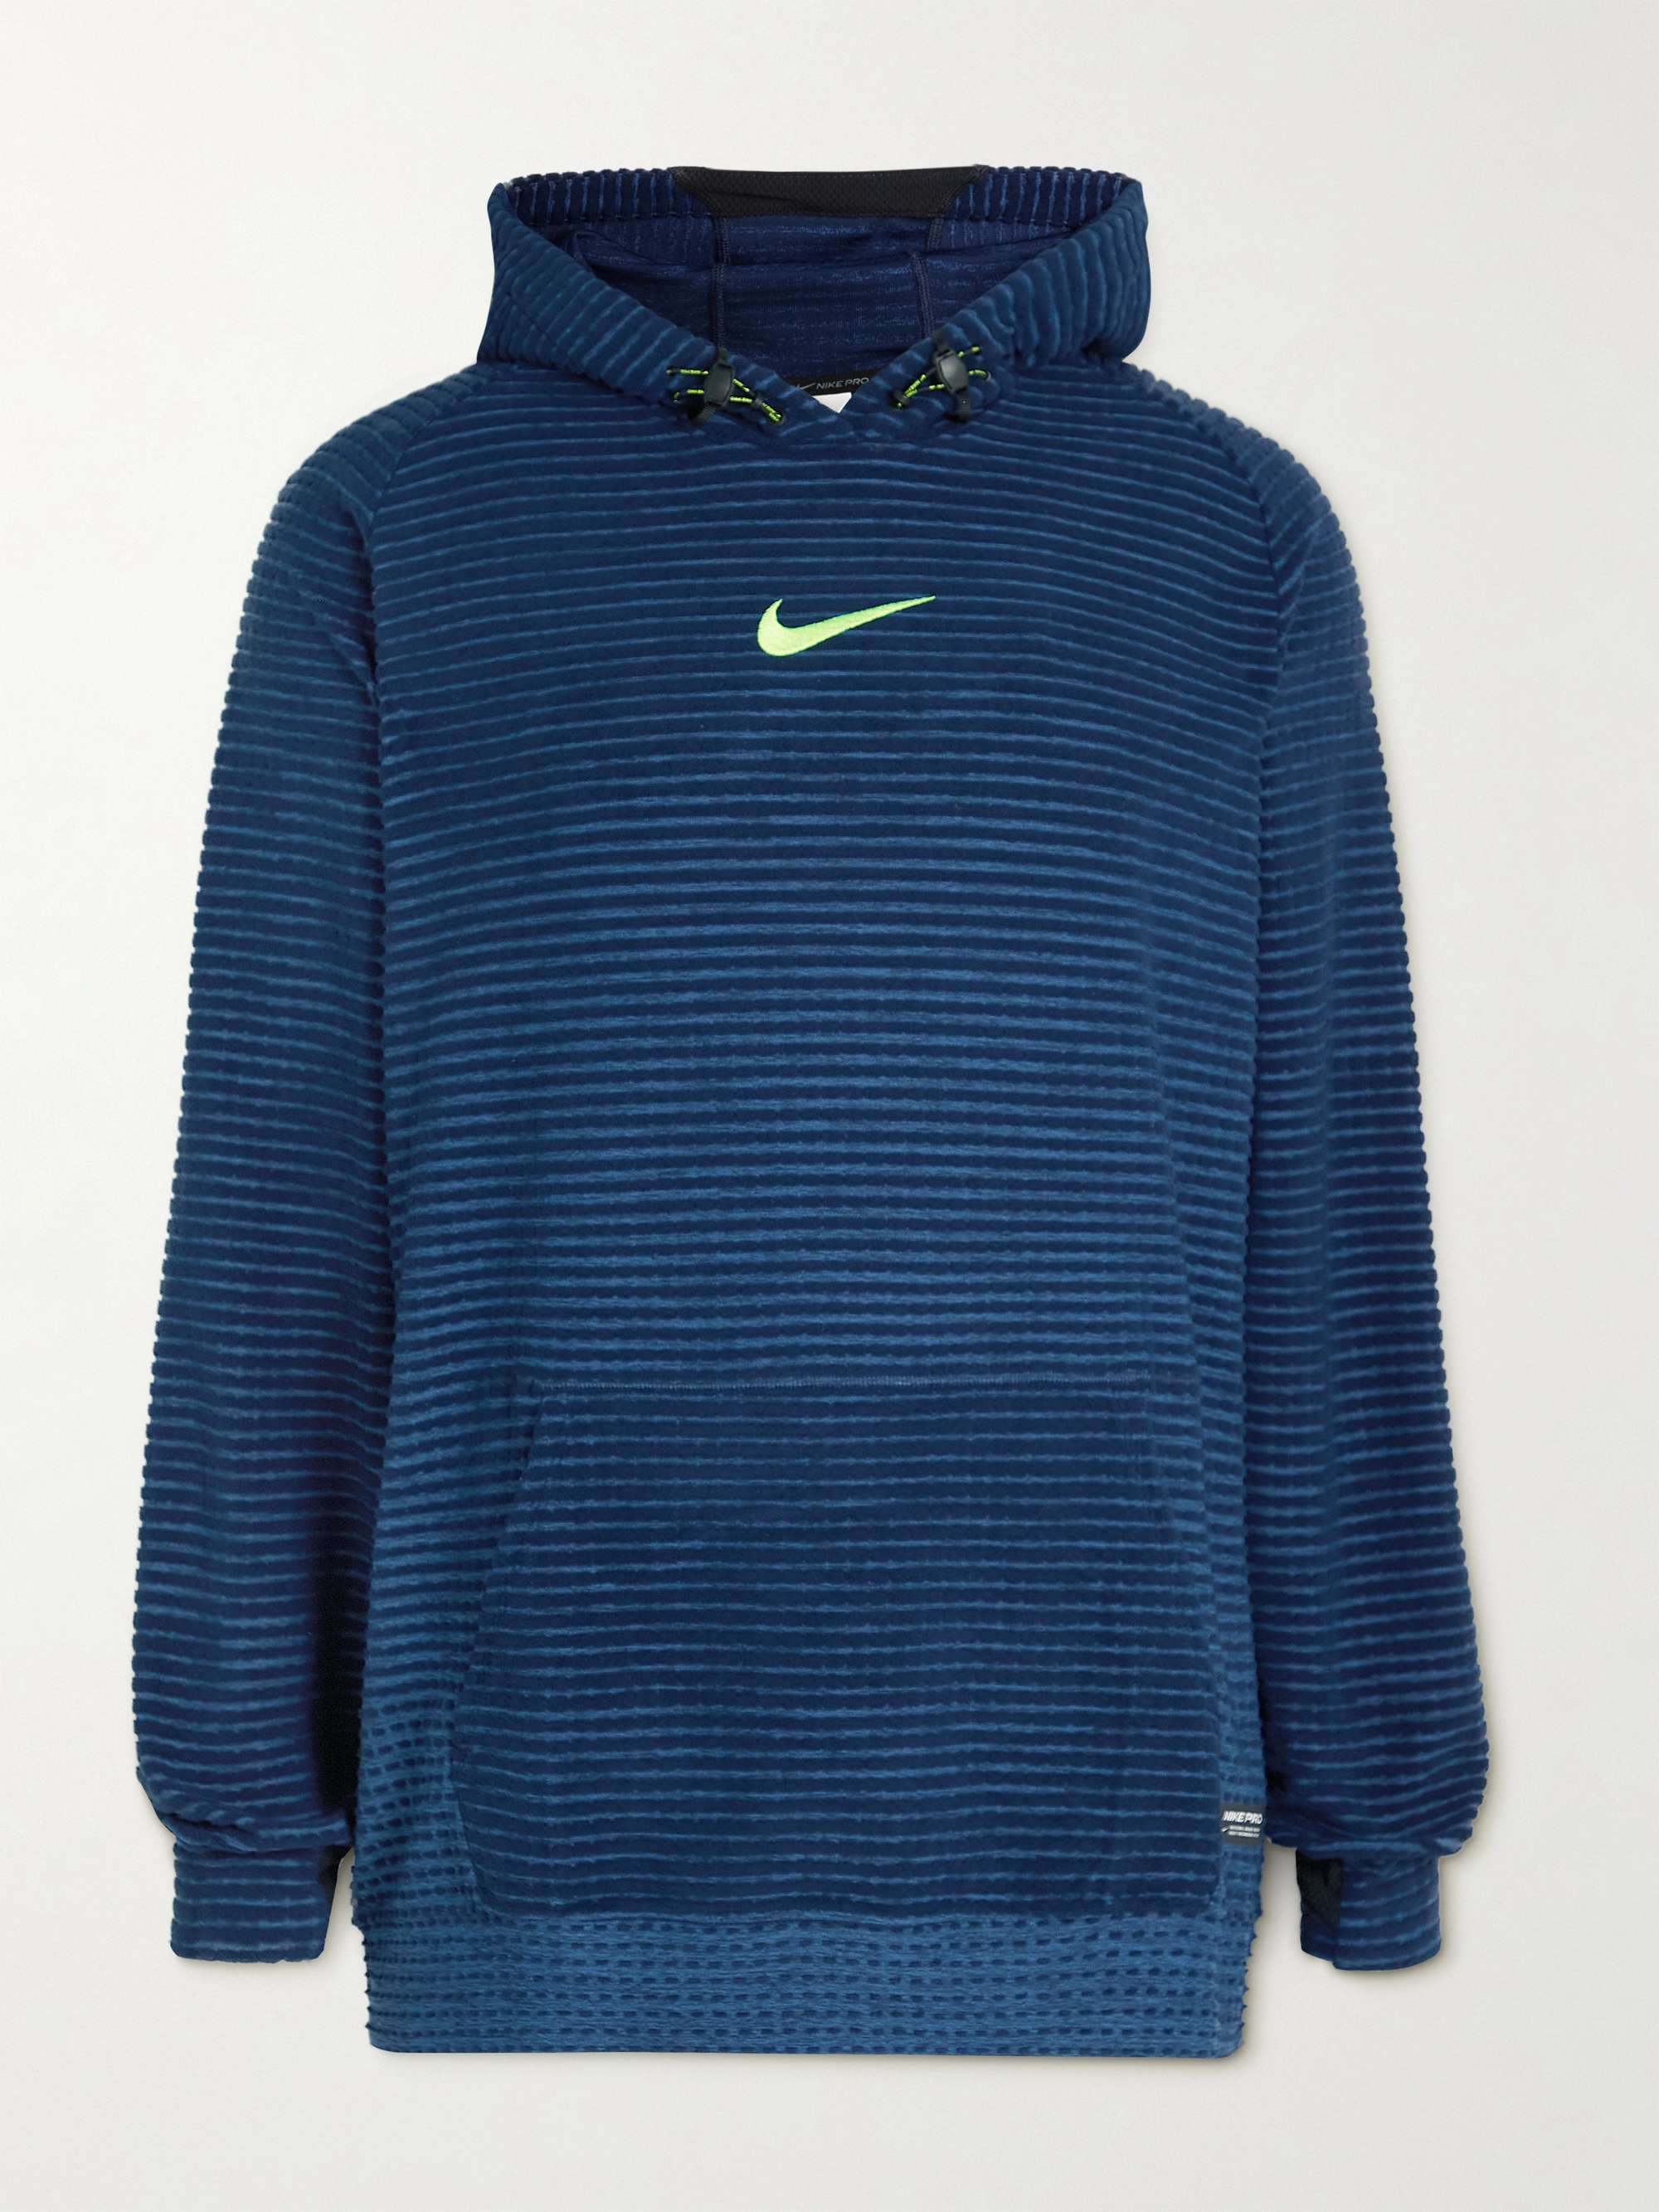 NIKE TRAINING Pro ADV Striped Therma-FIT Hoodie